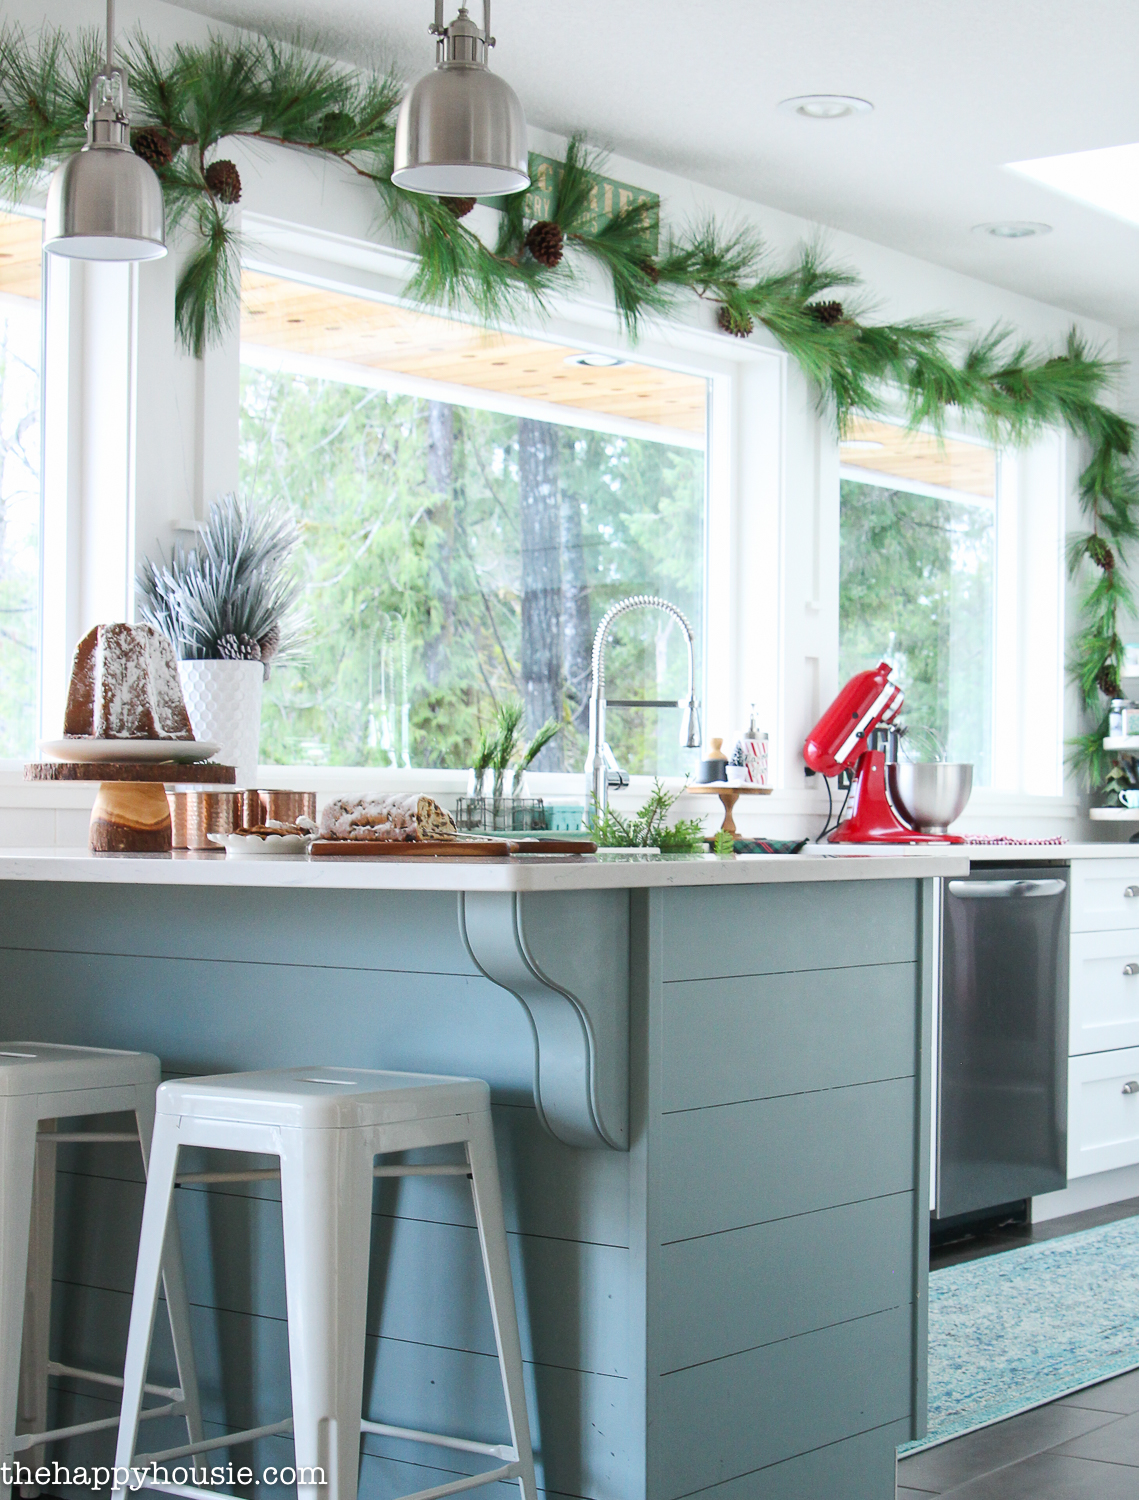 A look at the decorated kitchen.